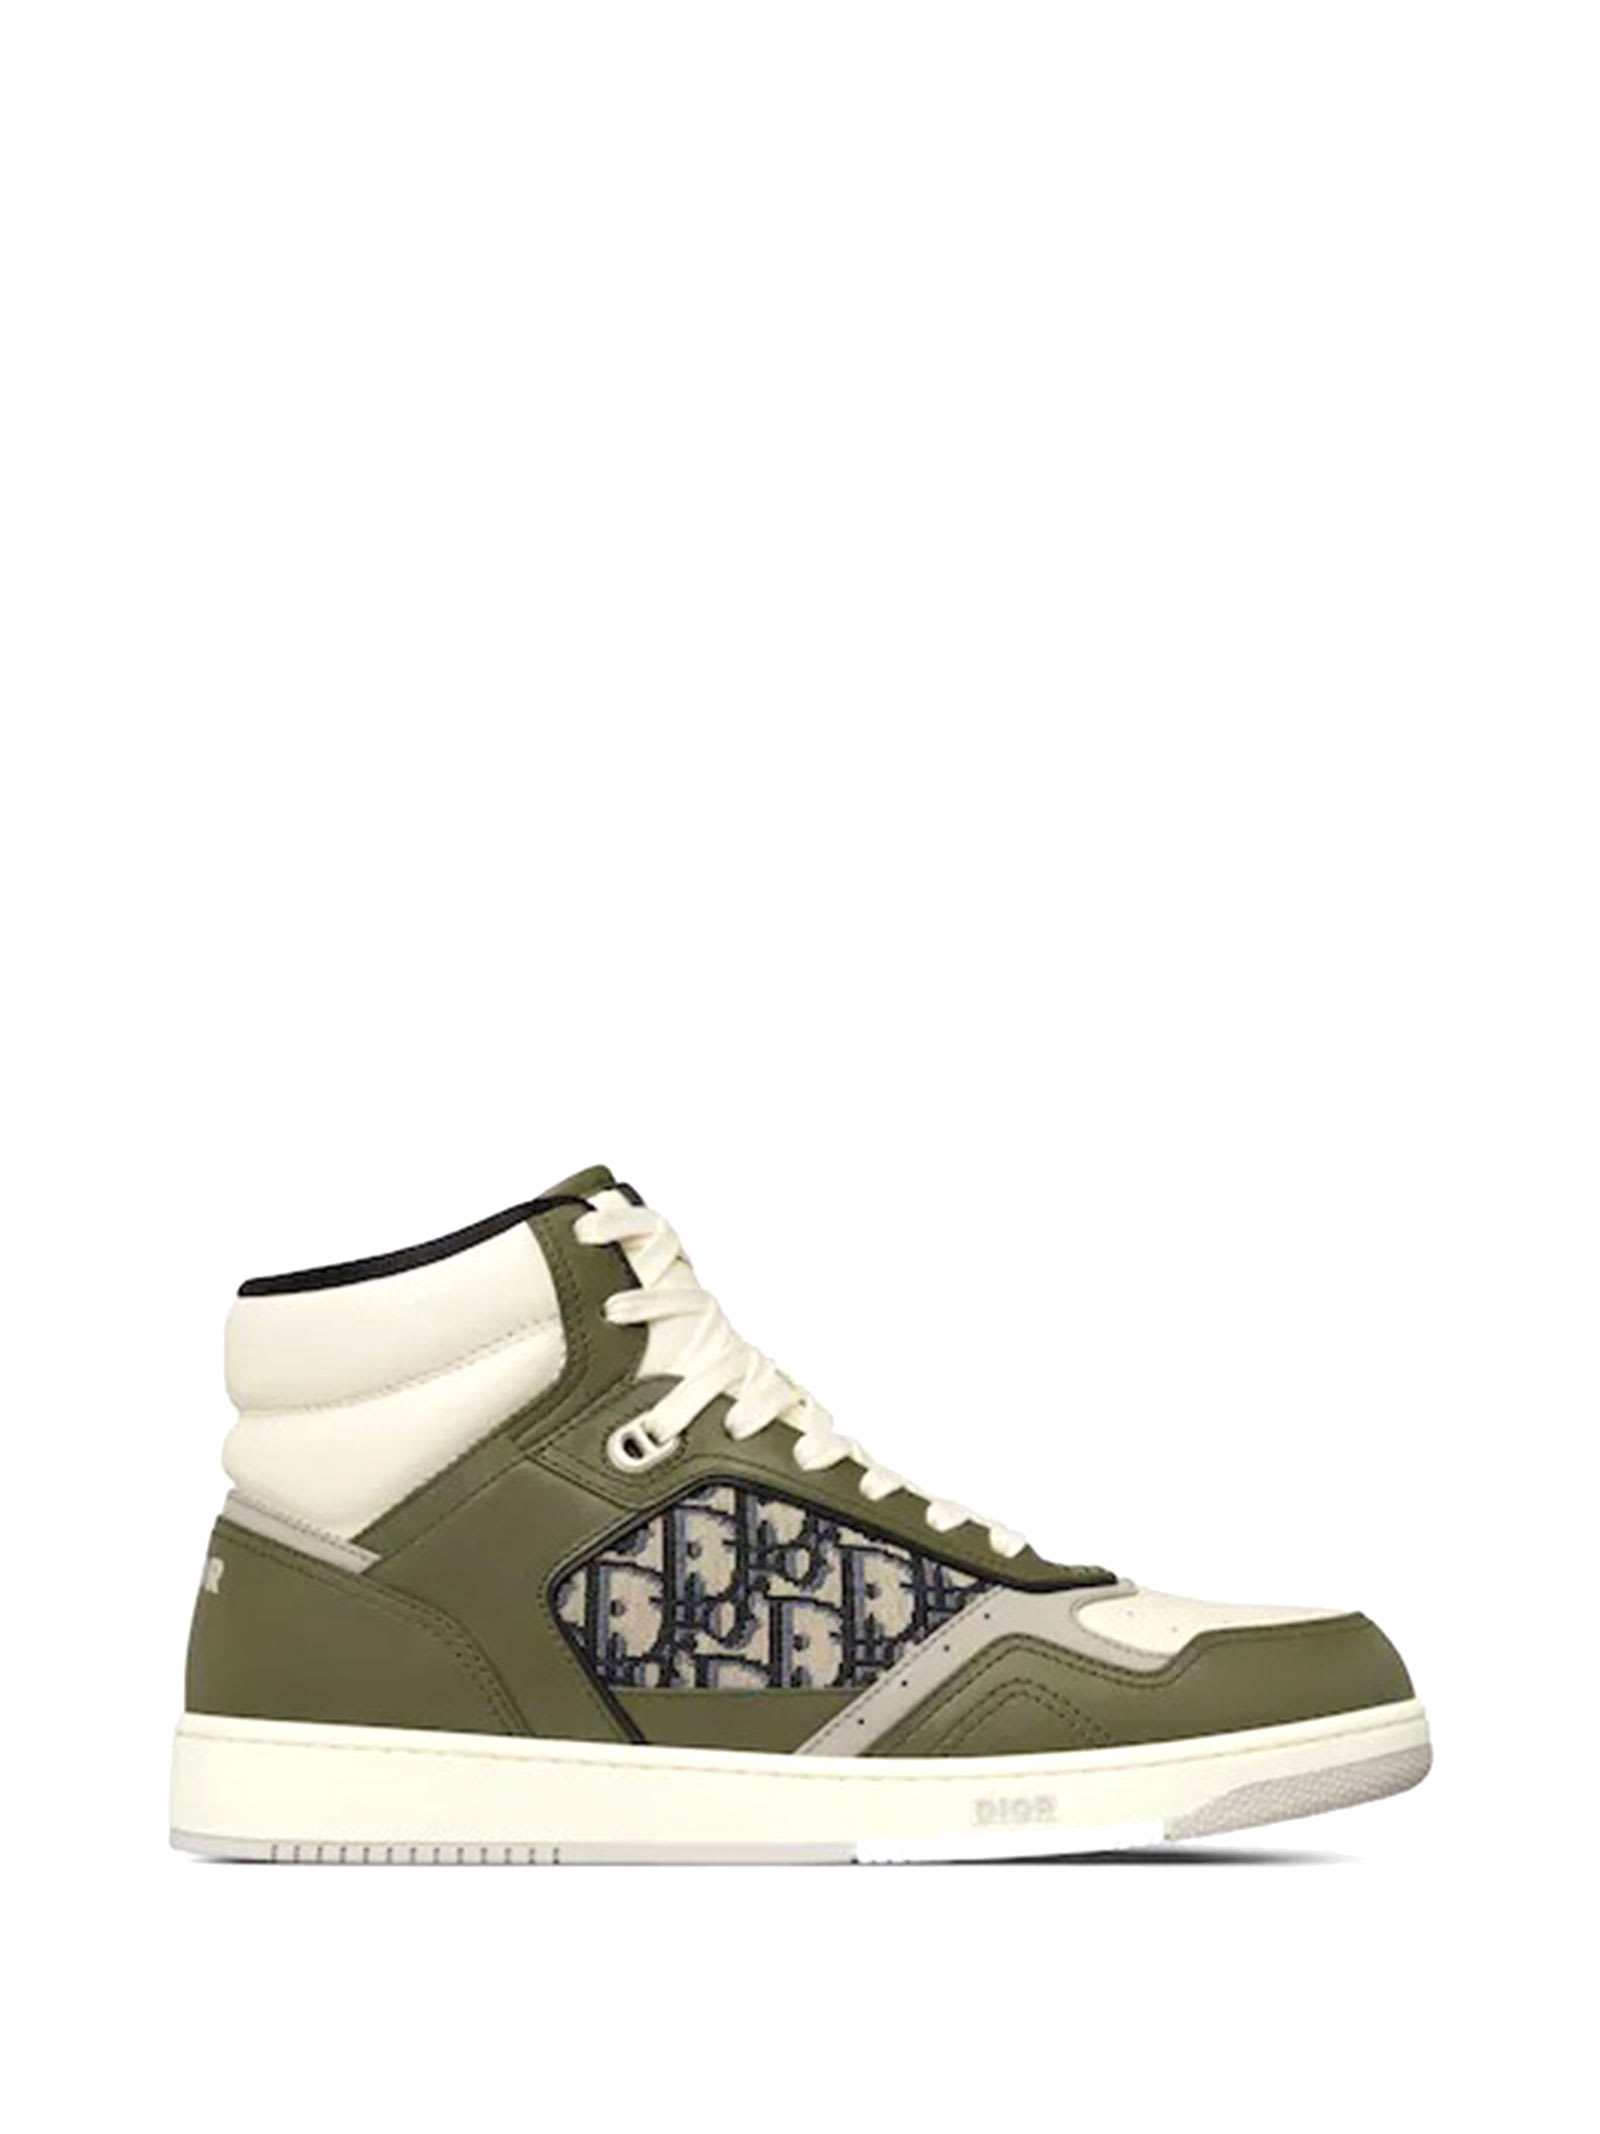 Dior Homme High-top Two-tone Sneaker With Logo